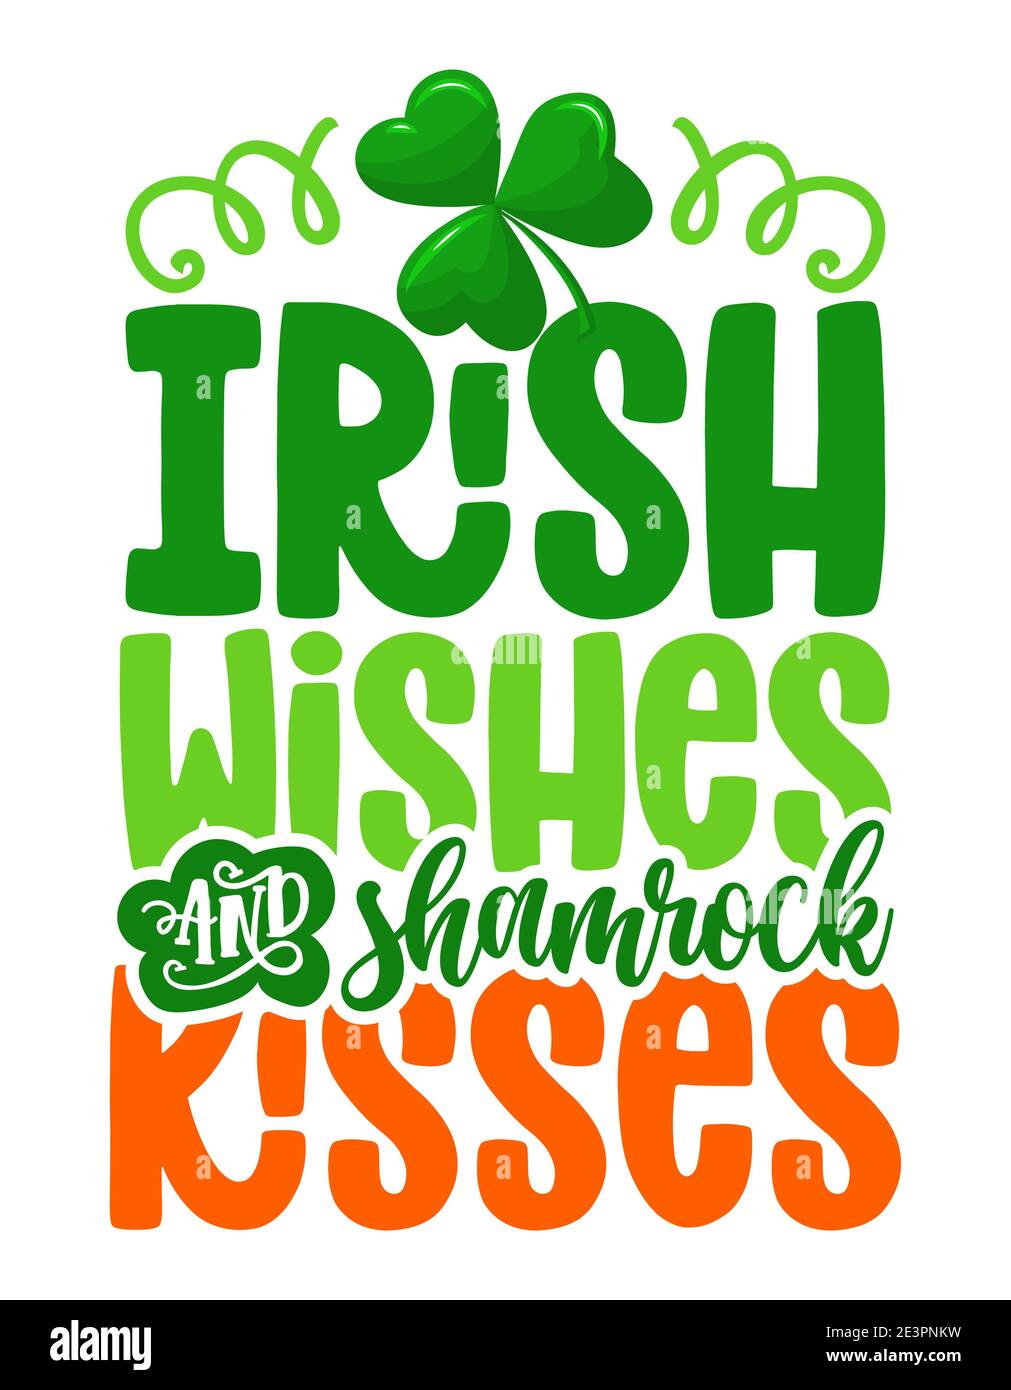 Irish wishes shamrock kisses - funny St Patrick's Day inspirational lettering design for posters, flyers, t-shirts, cards, invitations, stickers, bann Stock Vector